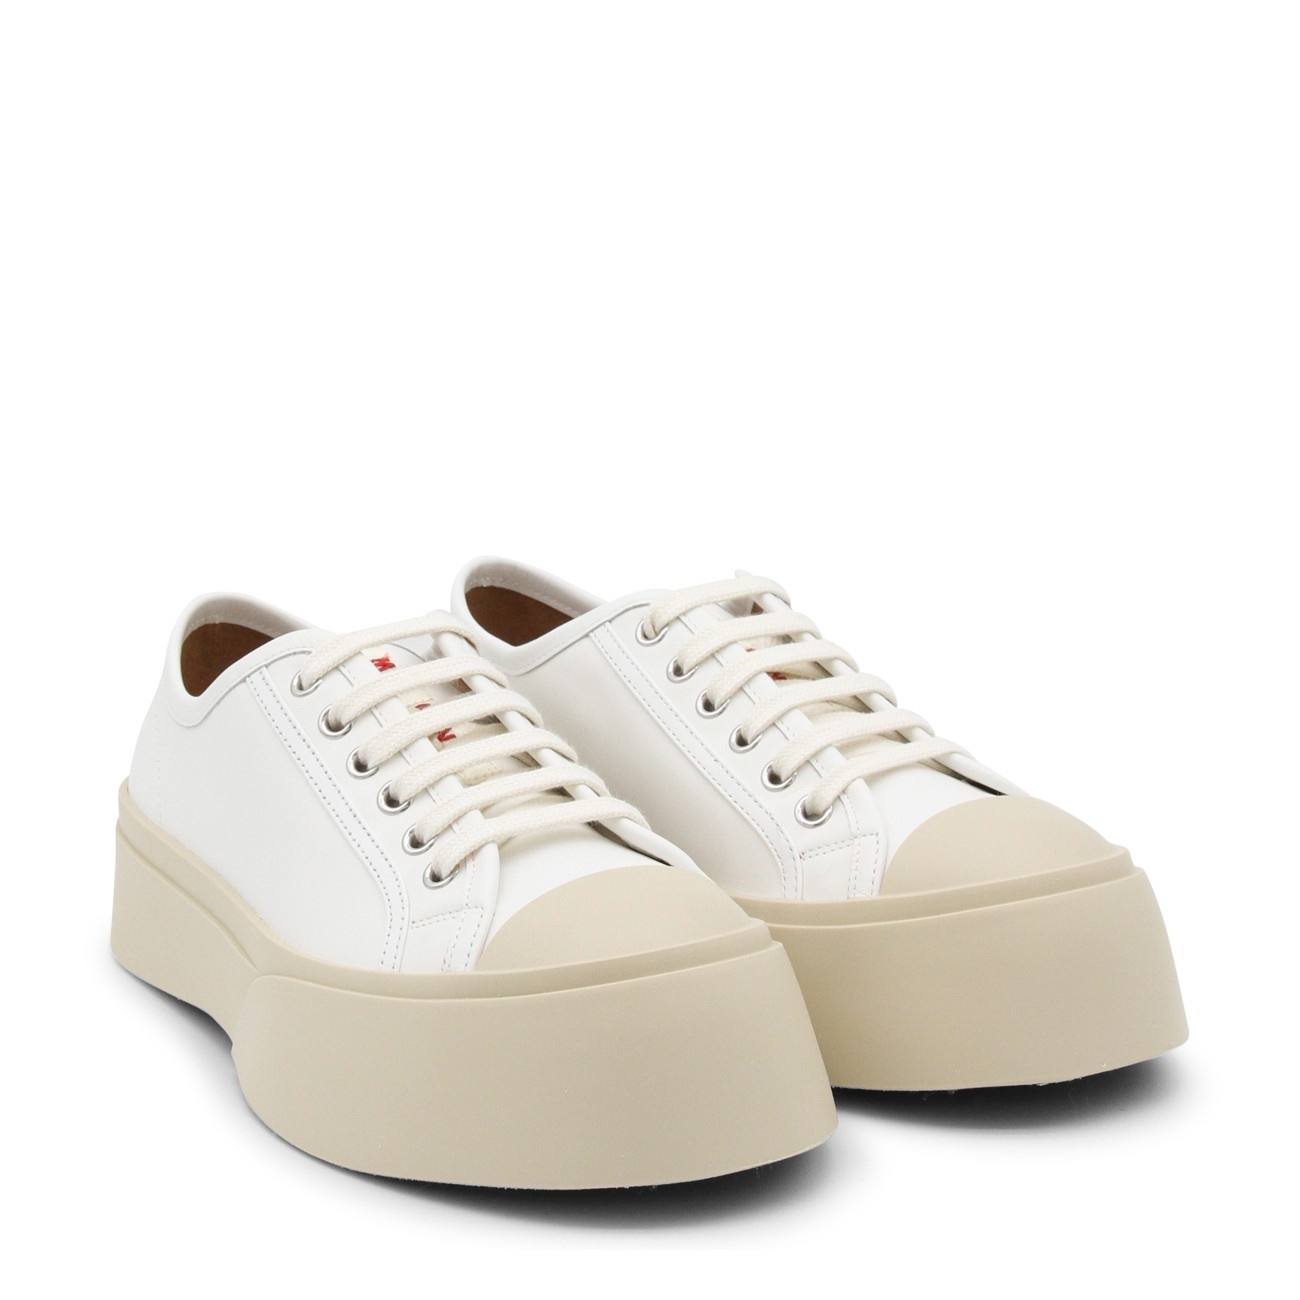 white leather pablo sneakers - 2